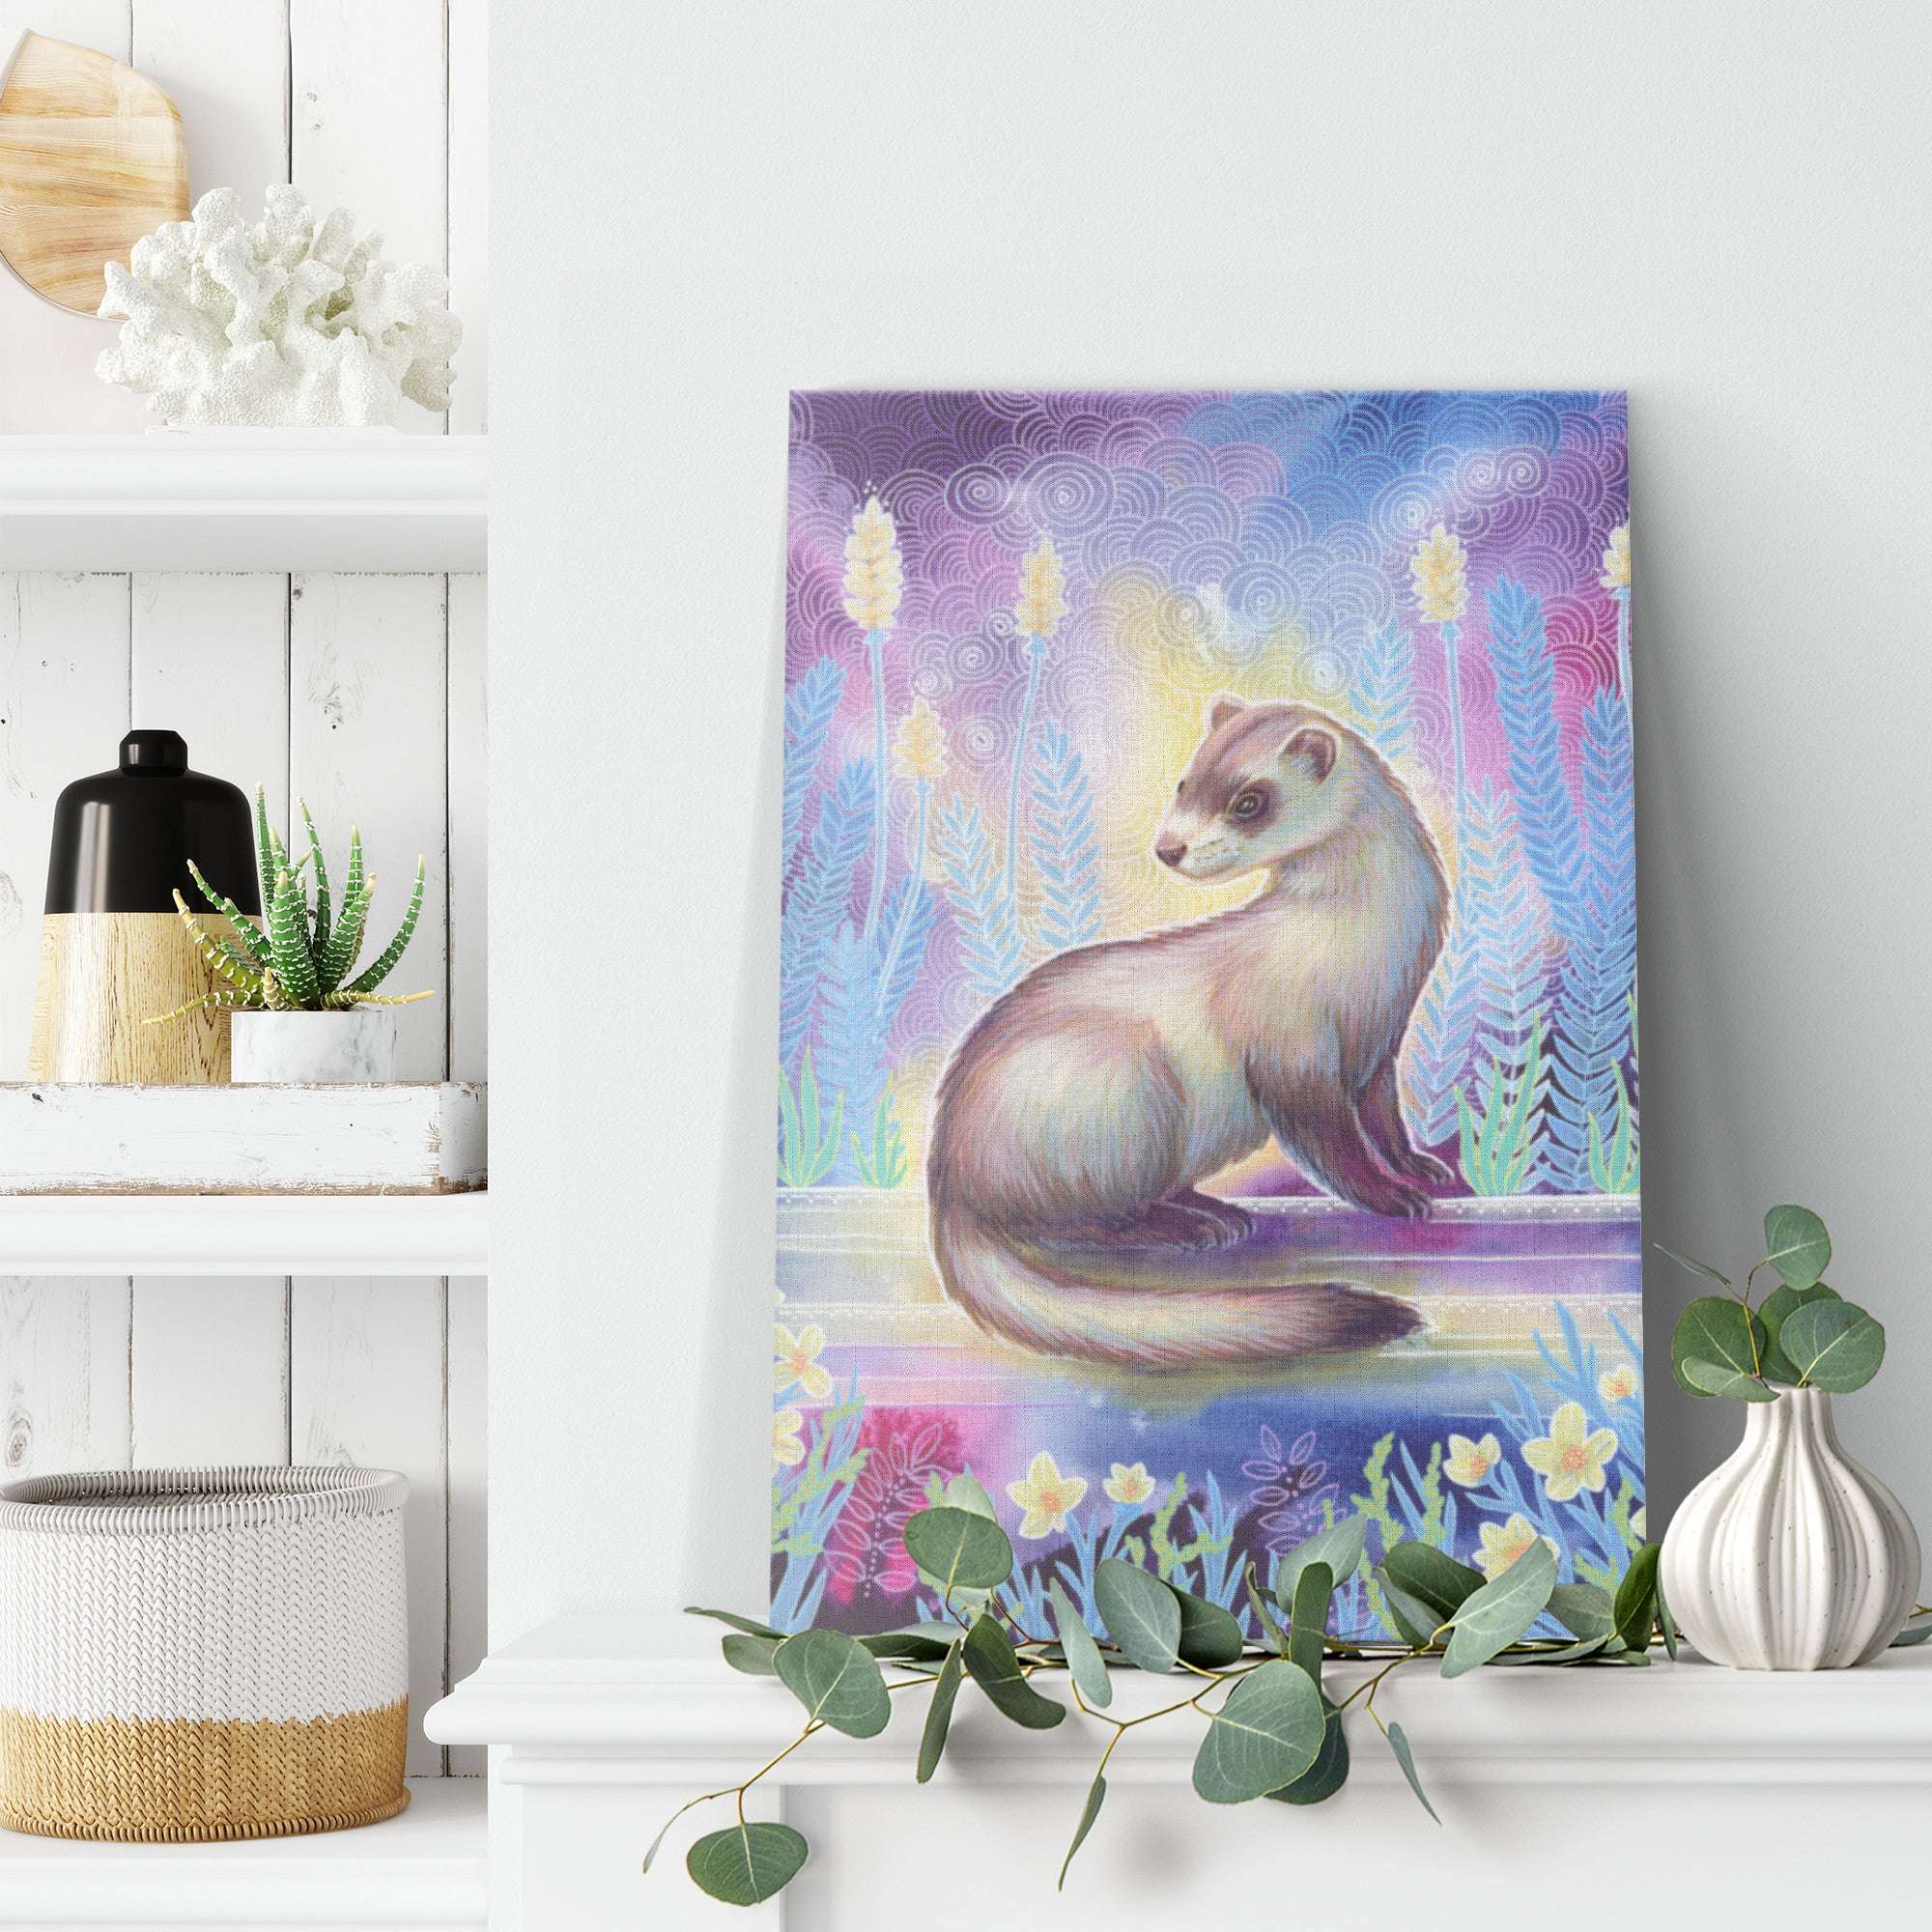 A Canvas Art Print of a ferret in a whimsical forest setting, displayed on a white wall above a shelf with decorative items.